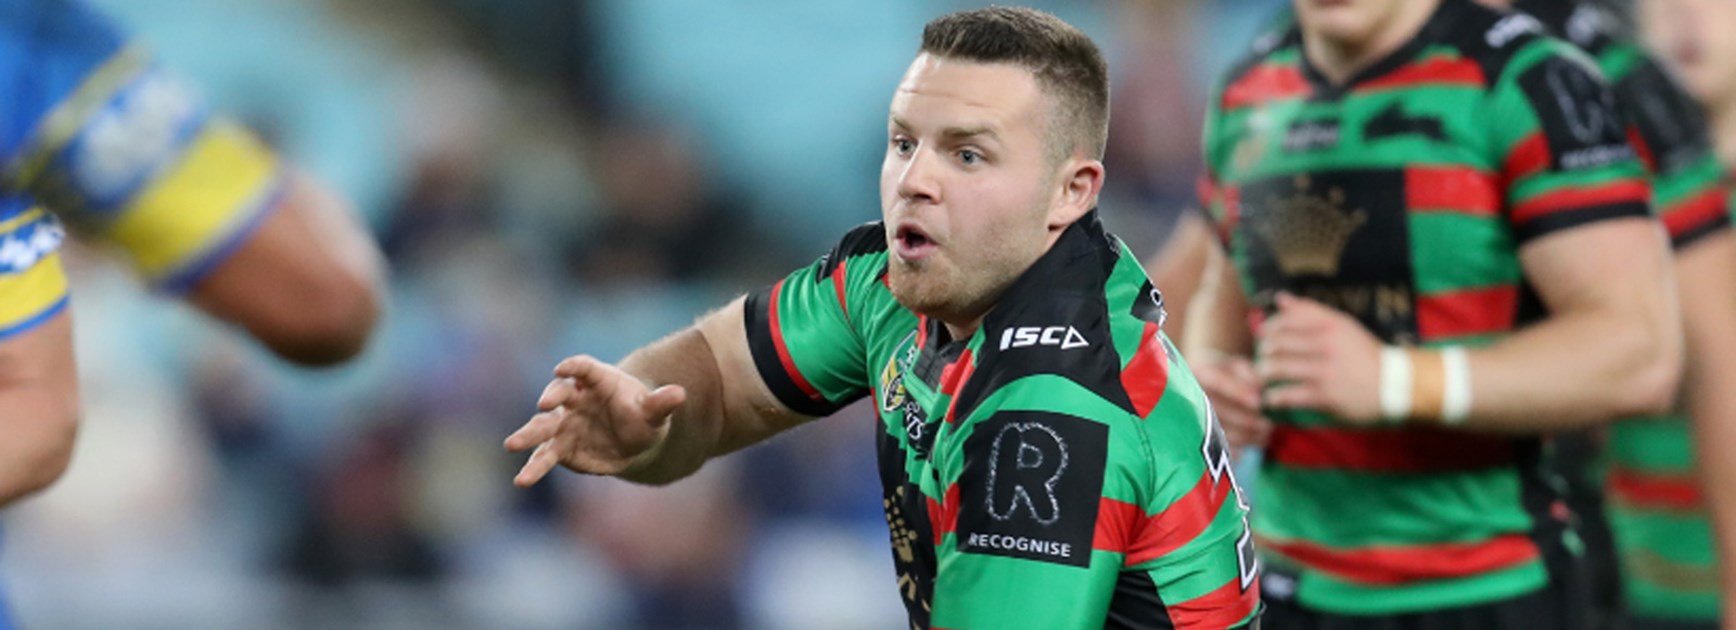 Rabbitohs prop Nathan Brown was impressive against the Eels on Friday night.